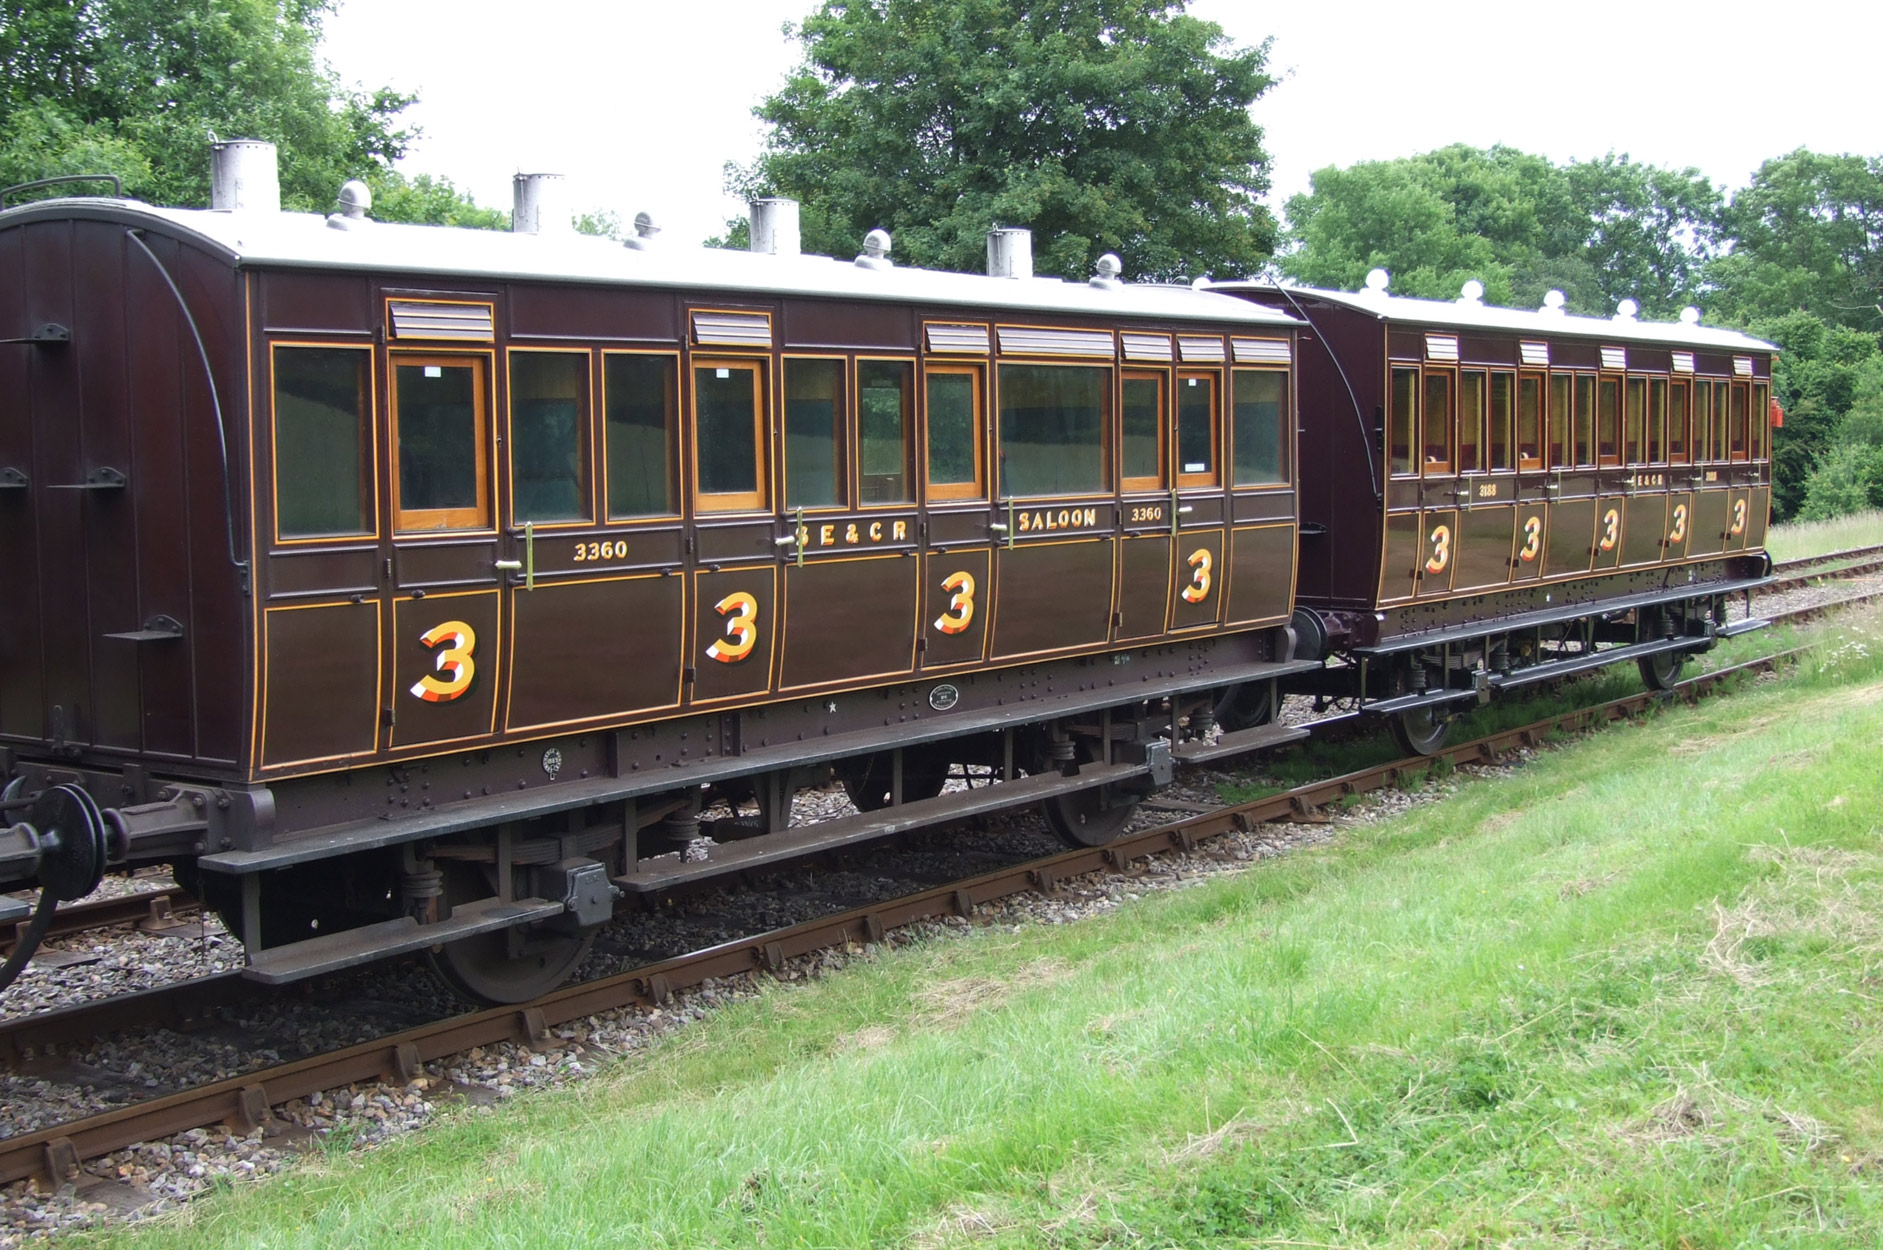 Greatest Train Carriage For Sale Learn more here!